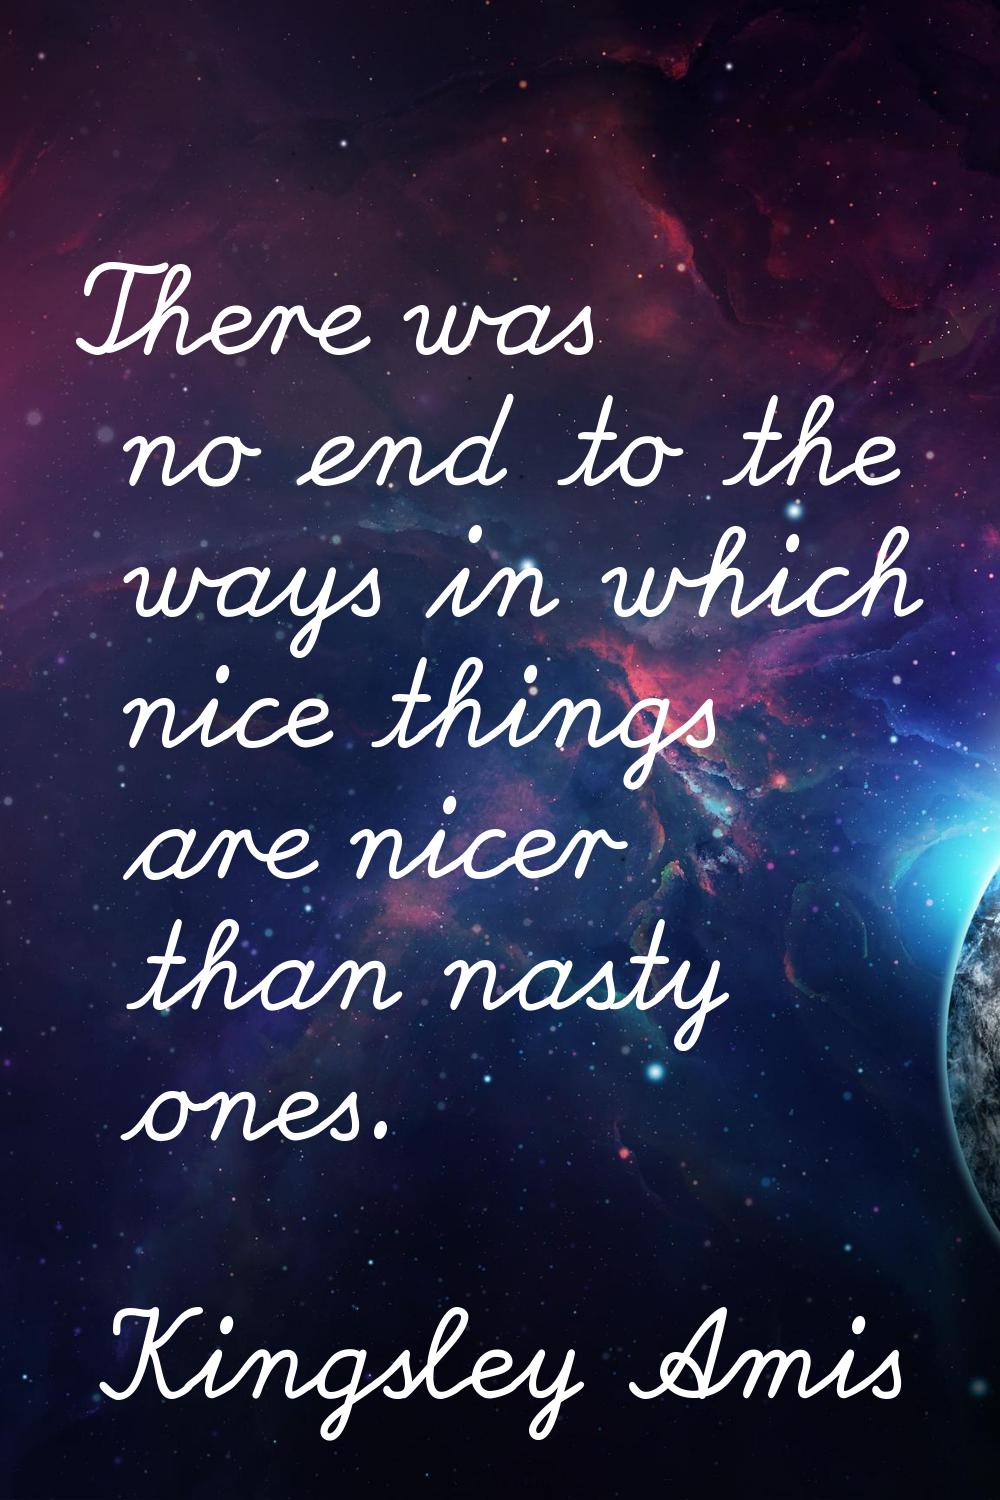 There was no end to the ways in which nice things are nicer than nasty ones.